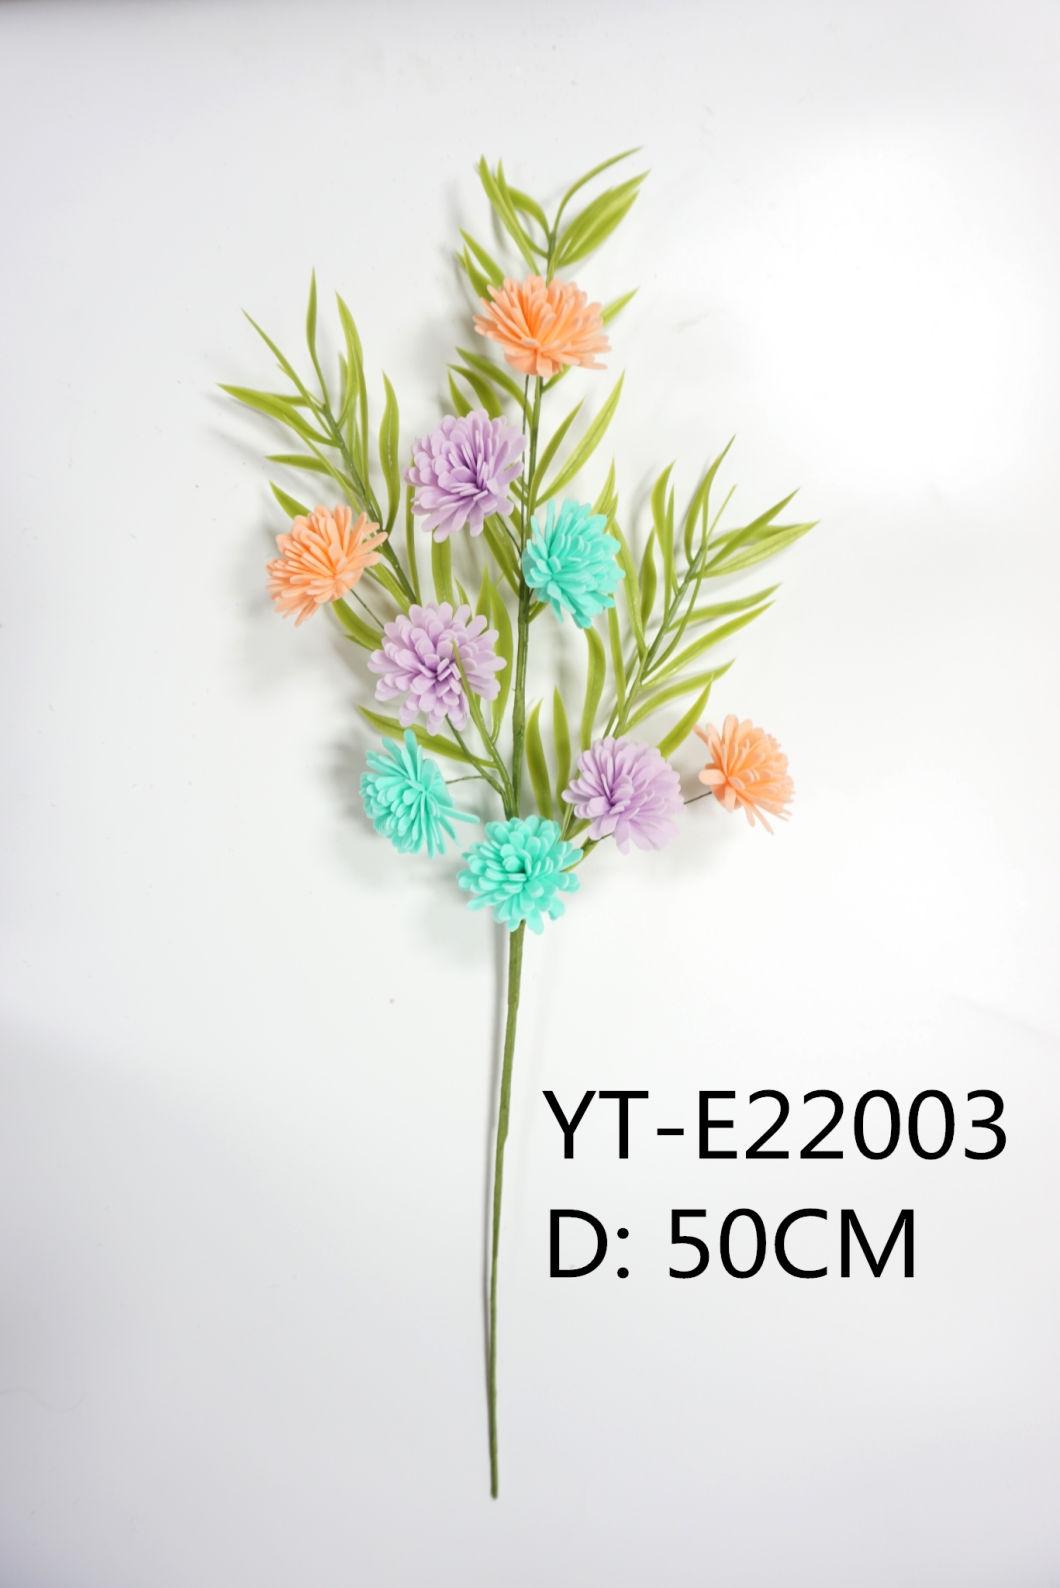 2022 Easter Wreath Decor Picks Crafts for Home Decoration